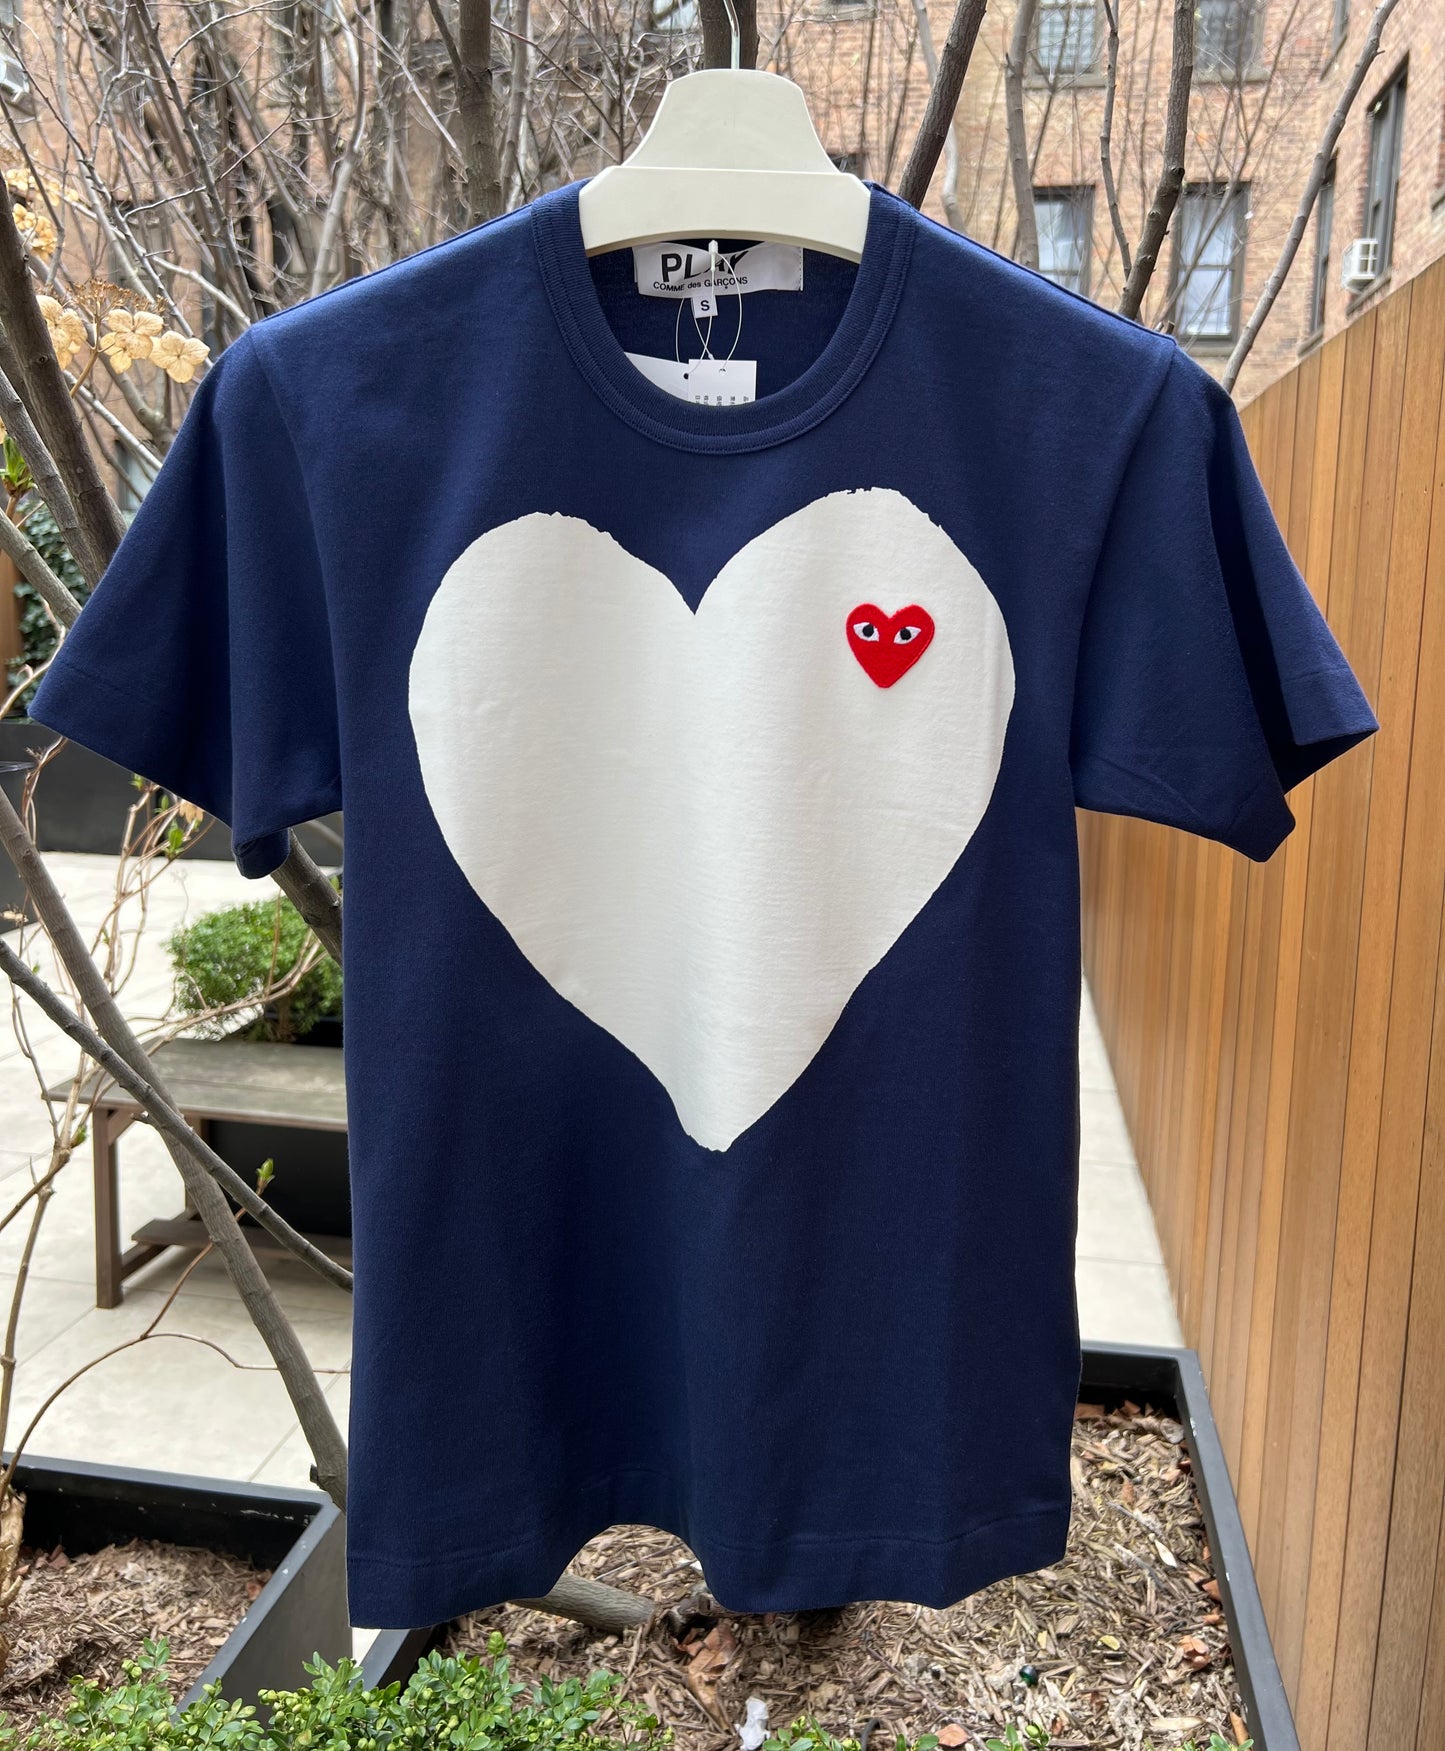 COMMES DES GARCONS P1T184 PLAY NAVY T-SHIRT RED HEART NAVY